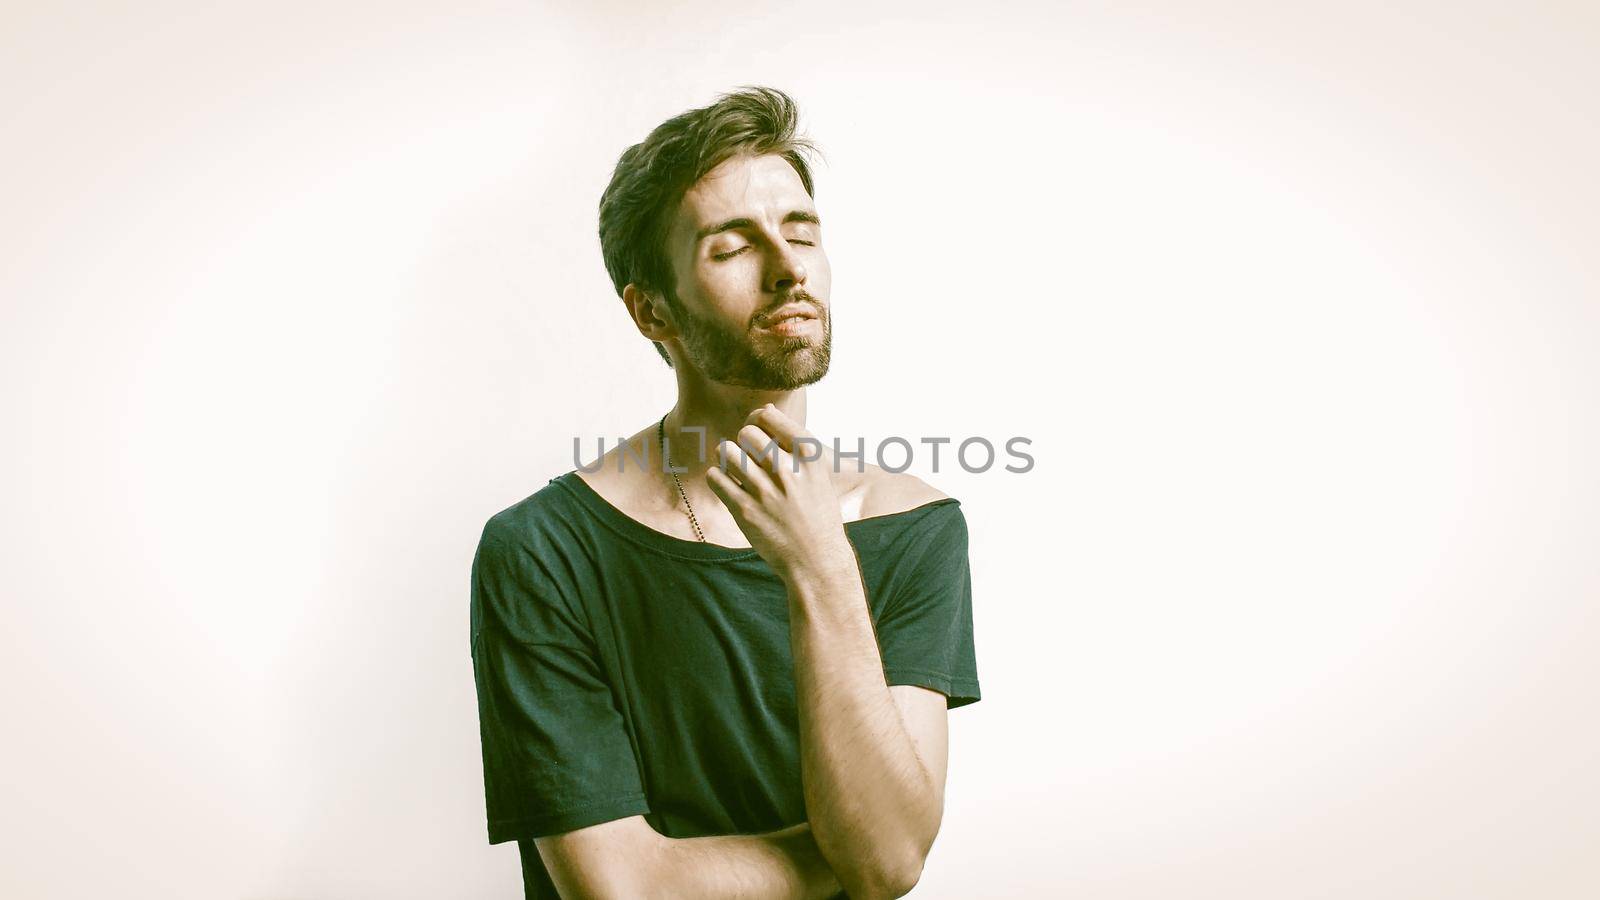 Handsome Man Relaxes Set His Face To The Light, Caucasian Young Man Closed His Eyes Posing In Studio On A White Background, Concept Of Male Beauty